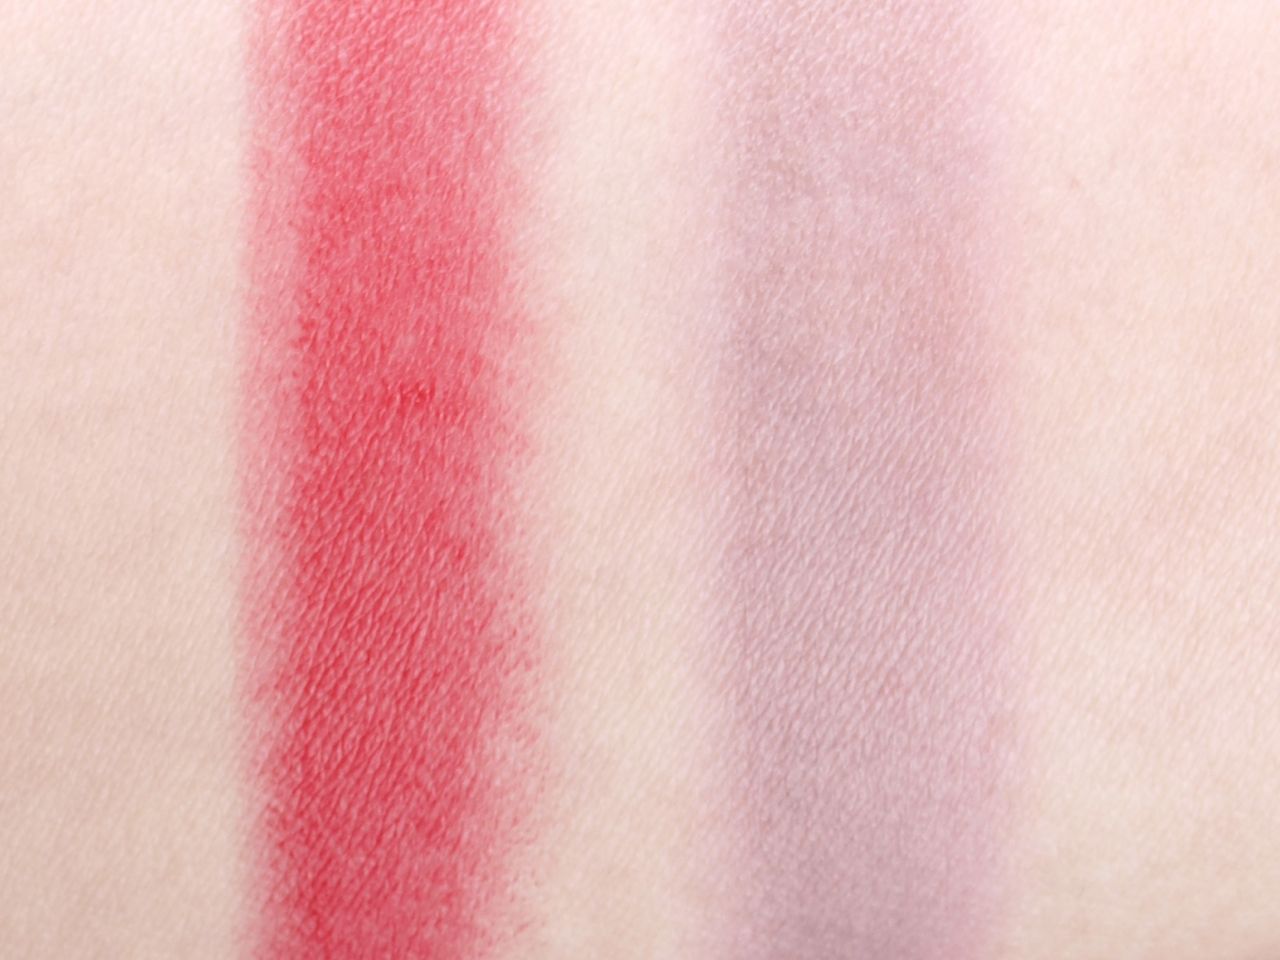 The Face Shop Lip & Cheek Velvet Stick in "Poppy Rouge" & "Poppy Universal": Review and Swatches